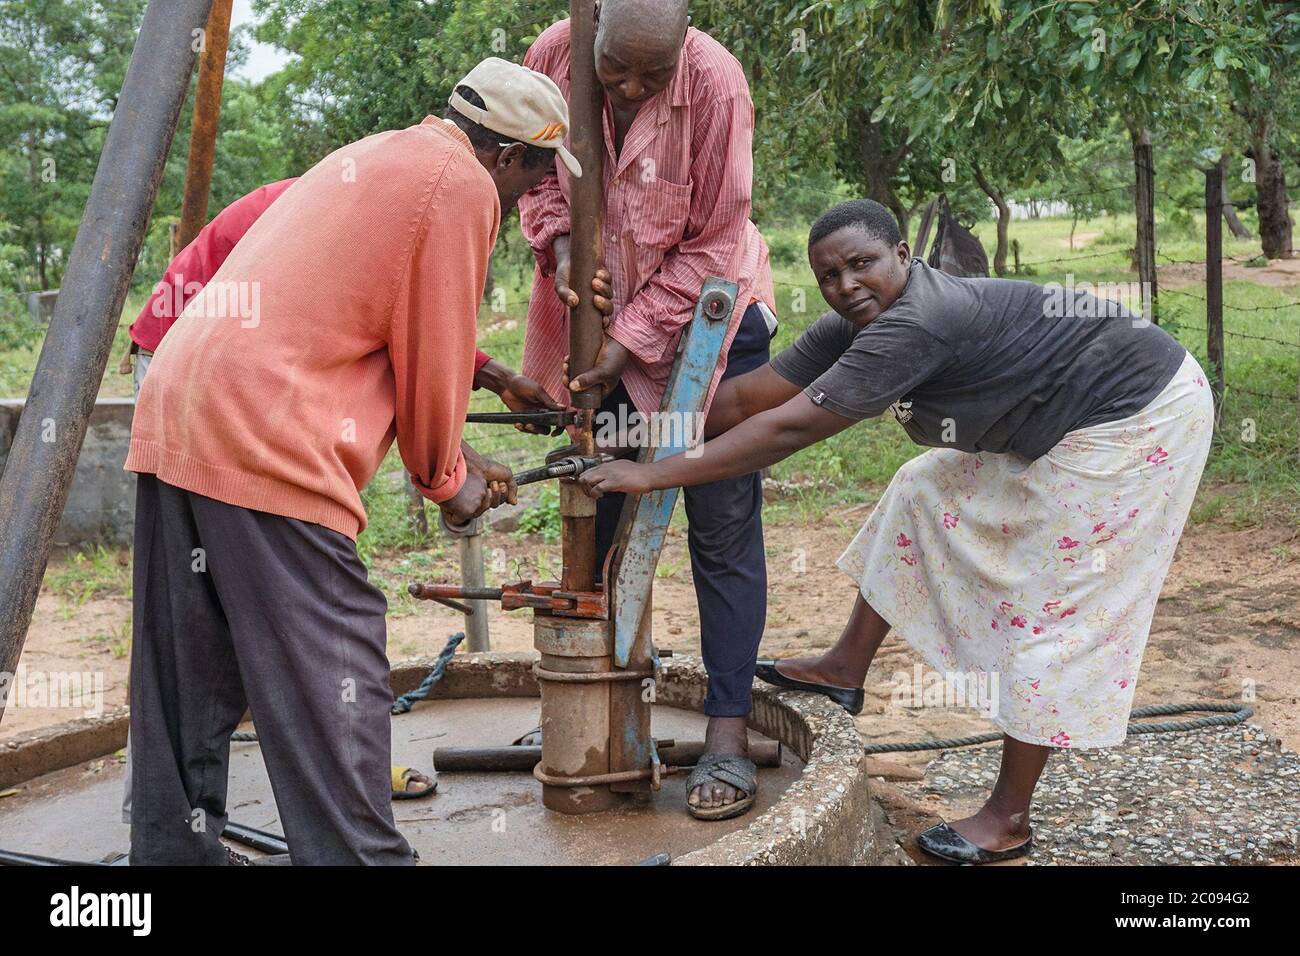 Primrose Masiyakurima (right) and other community members repair a broken borehole in Dora Ward 35, located in Zimbabwe’s Mutare District. This borehole provides water to 22 households and a school of 350 children. A few villagers are given equipment and trained as Village Pump Mechanics (VPMs), so they can repair broken boreholes themselves instead of waiting for district authorities. (Evidence Chenjerai, GPJ Zimbabwe) Stock Photo